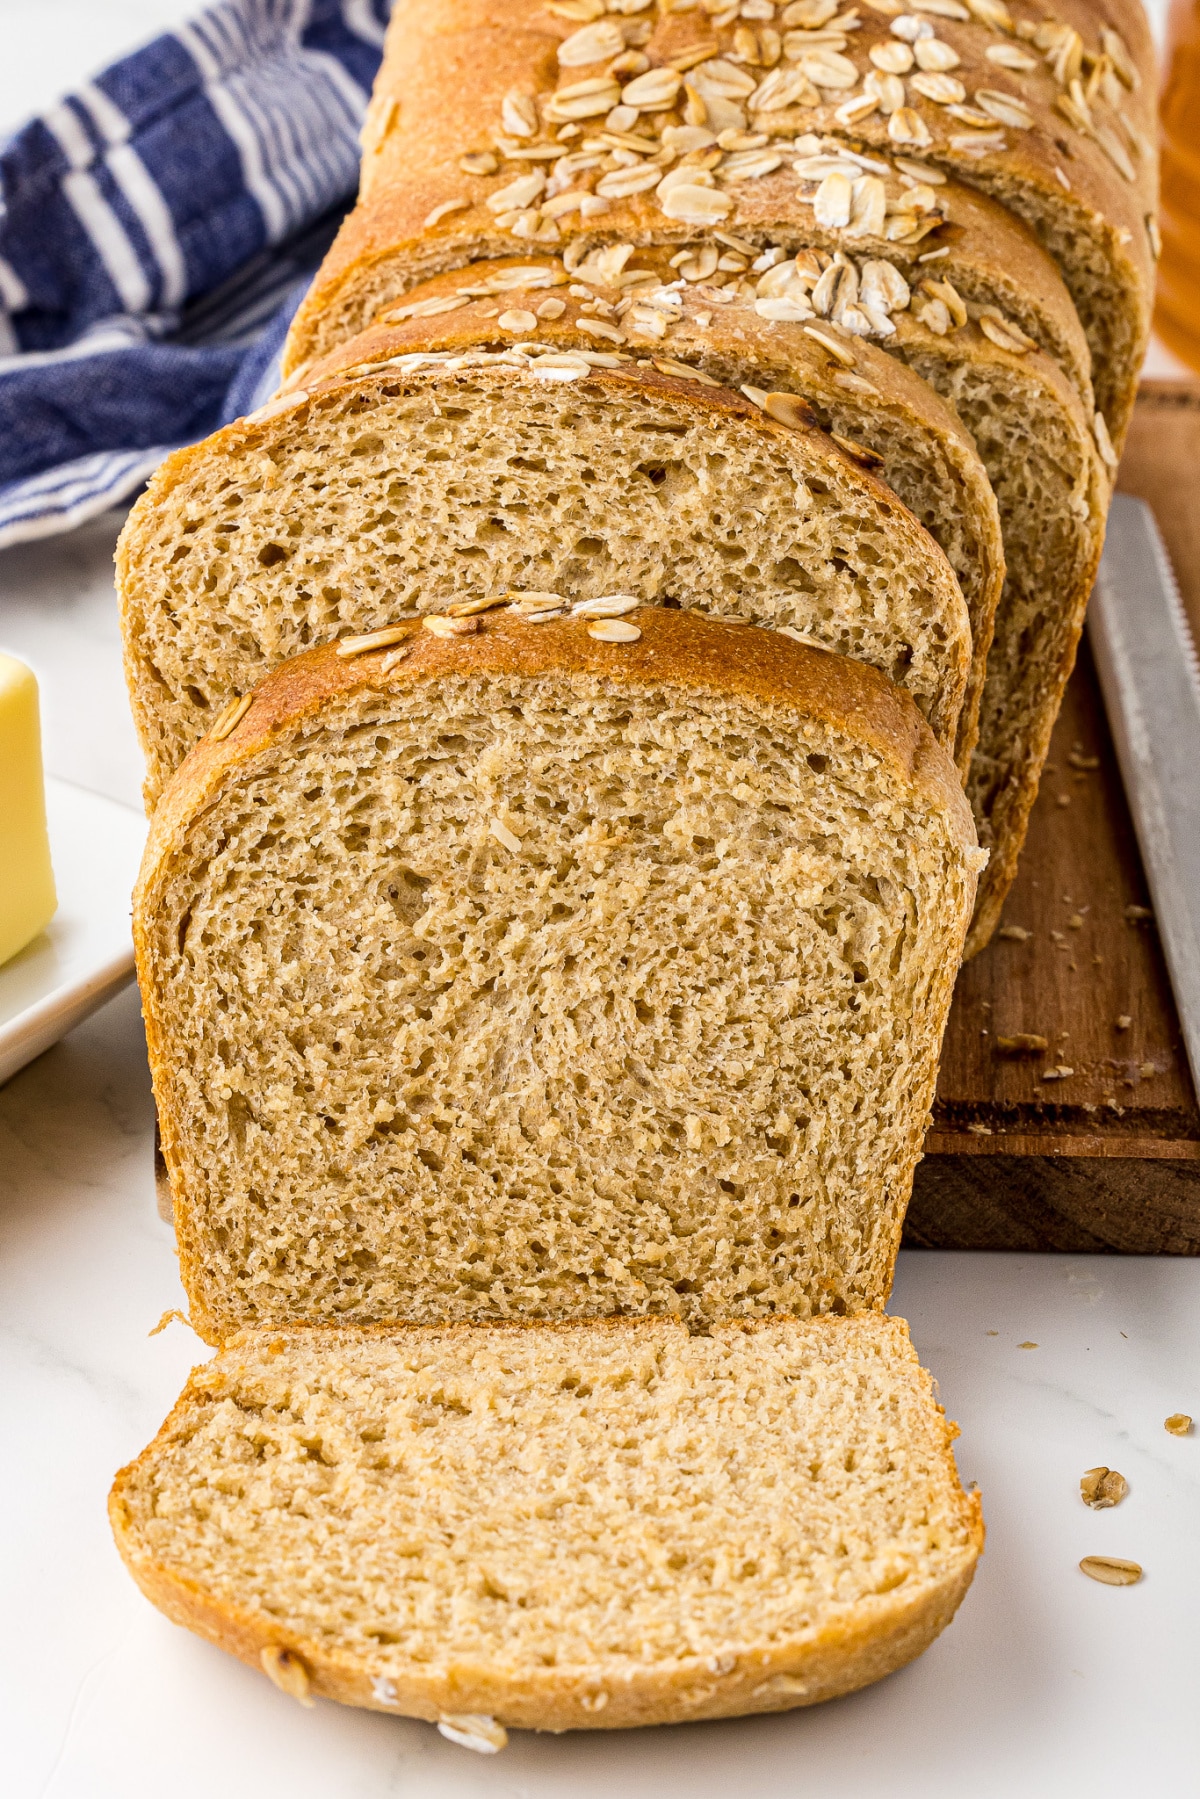 https://sheshared.com/wp-content/uploads/2023/03/Easy-no-knead-whole-wheat-bread-recipe.jpg